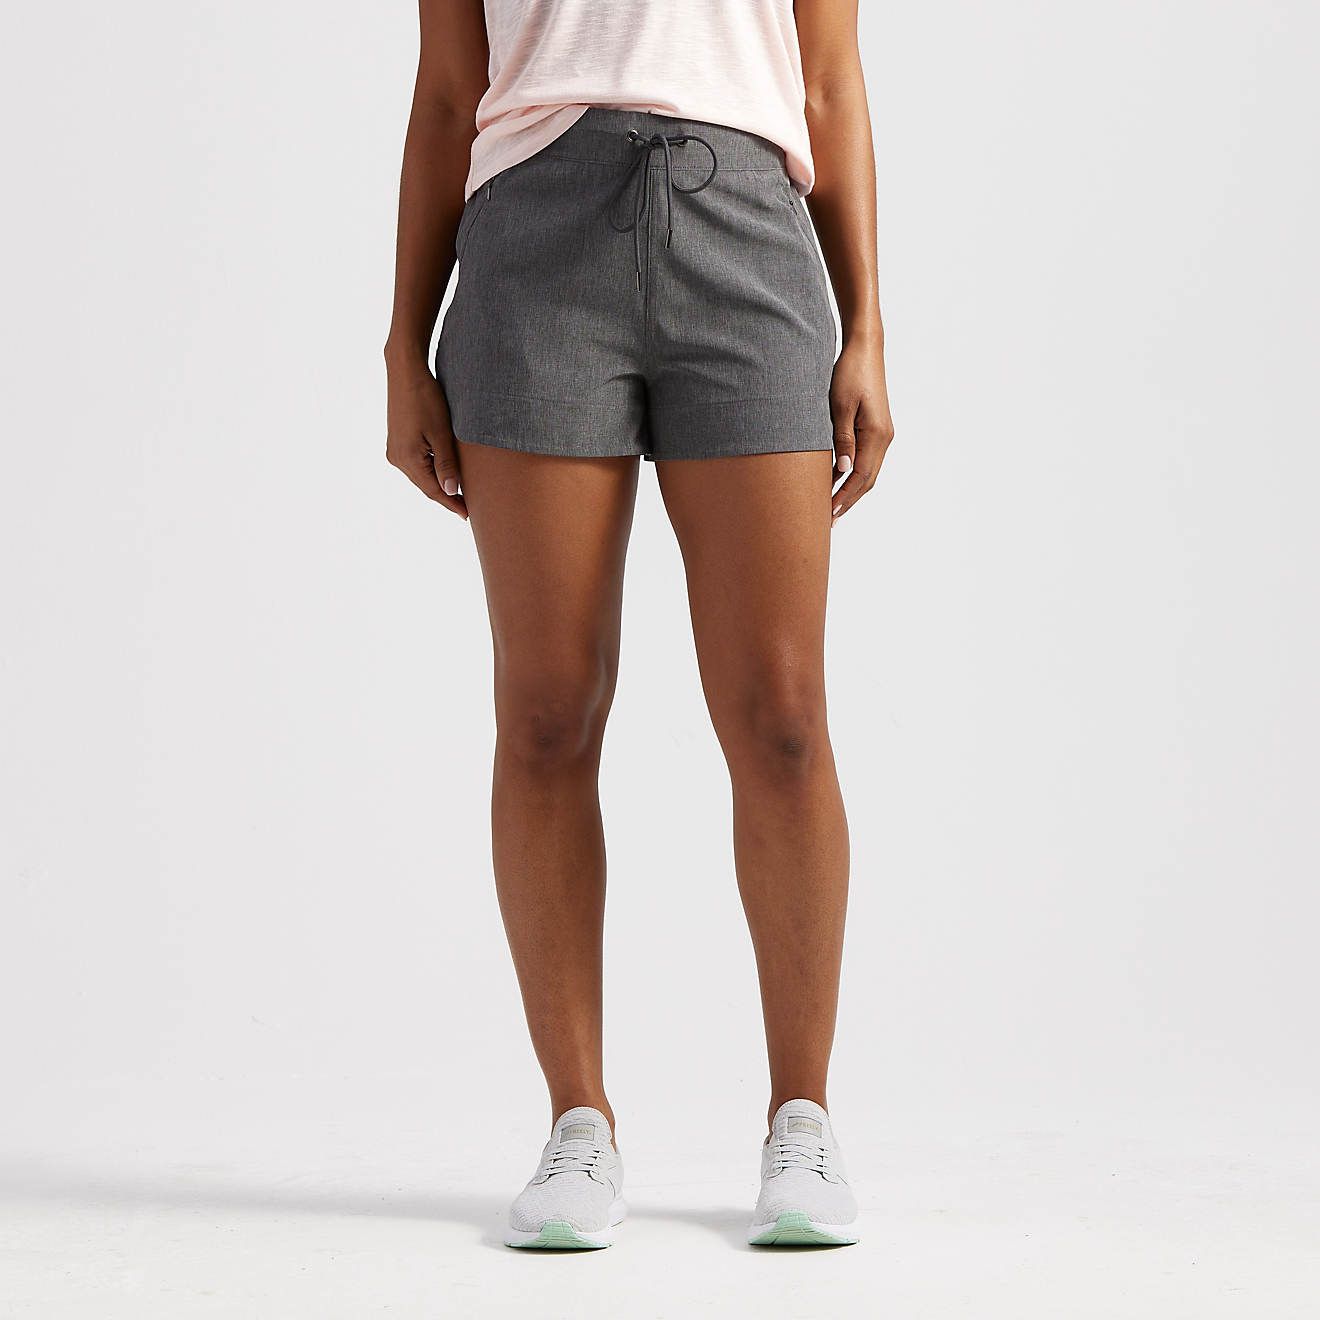 Freely Women's Gear Up Woven Zip Pocket Shorts | Academy Sports + Outdoor Affiliate